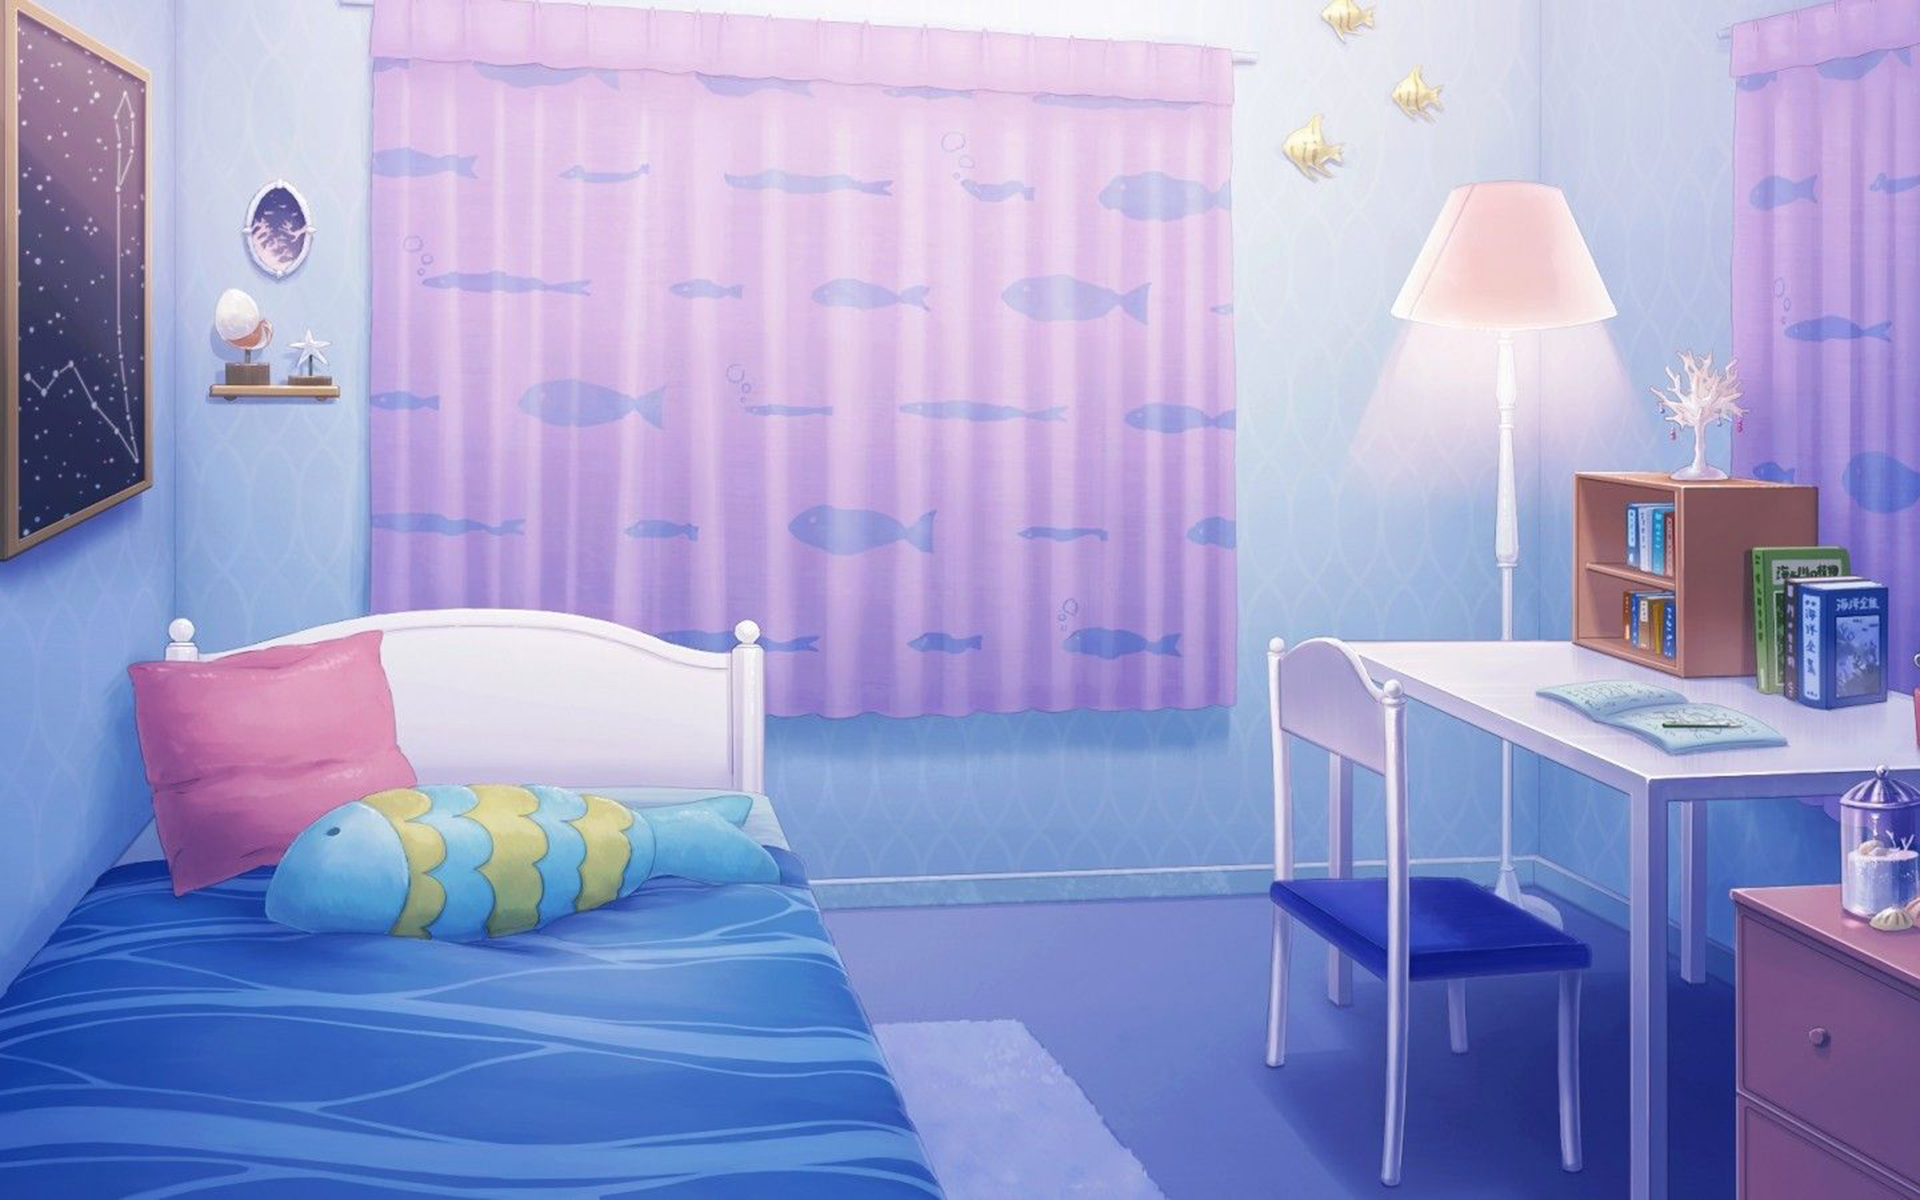 11 Anime Bedroom Ideas That Are Aesthetically Pleasing